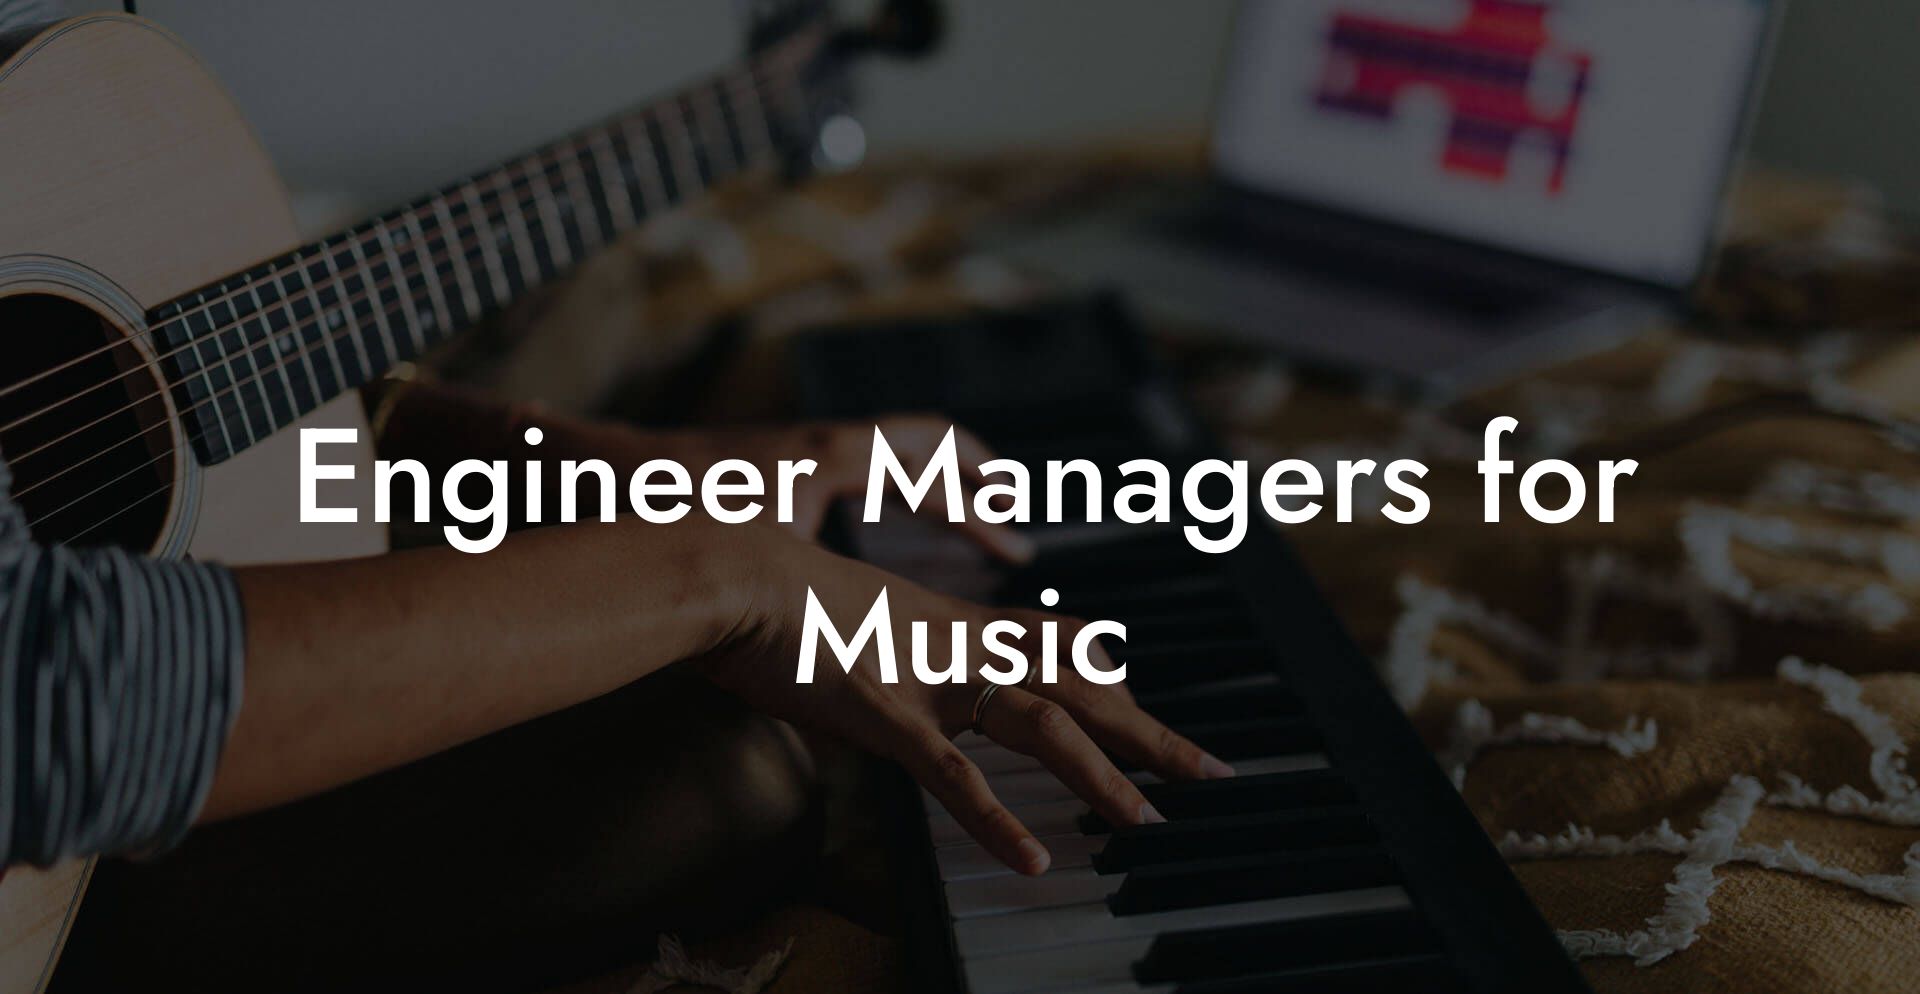 Engineer Managers for Music